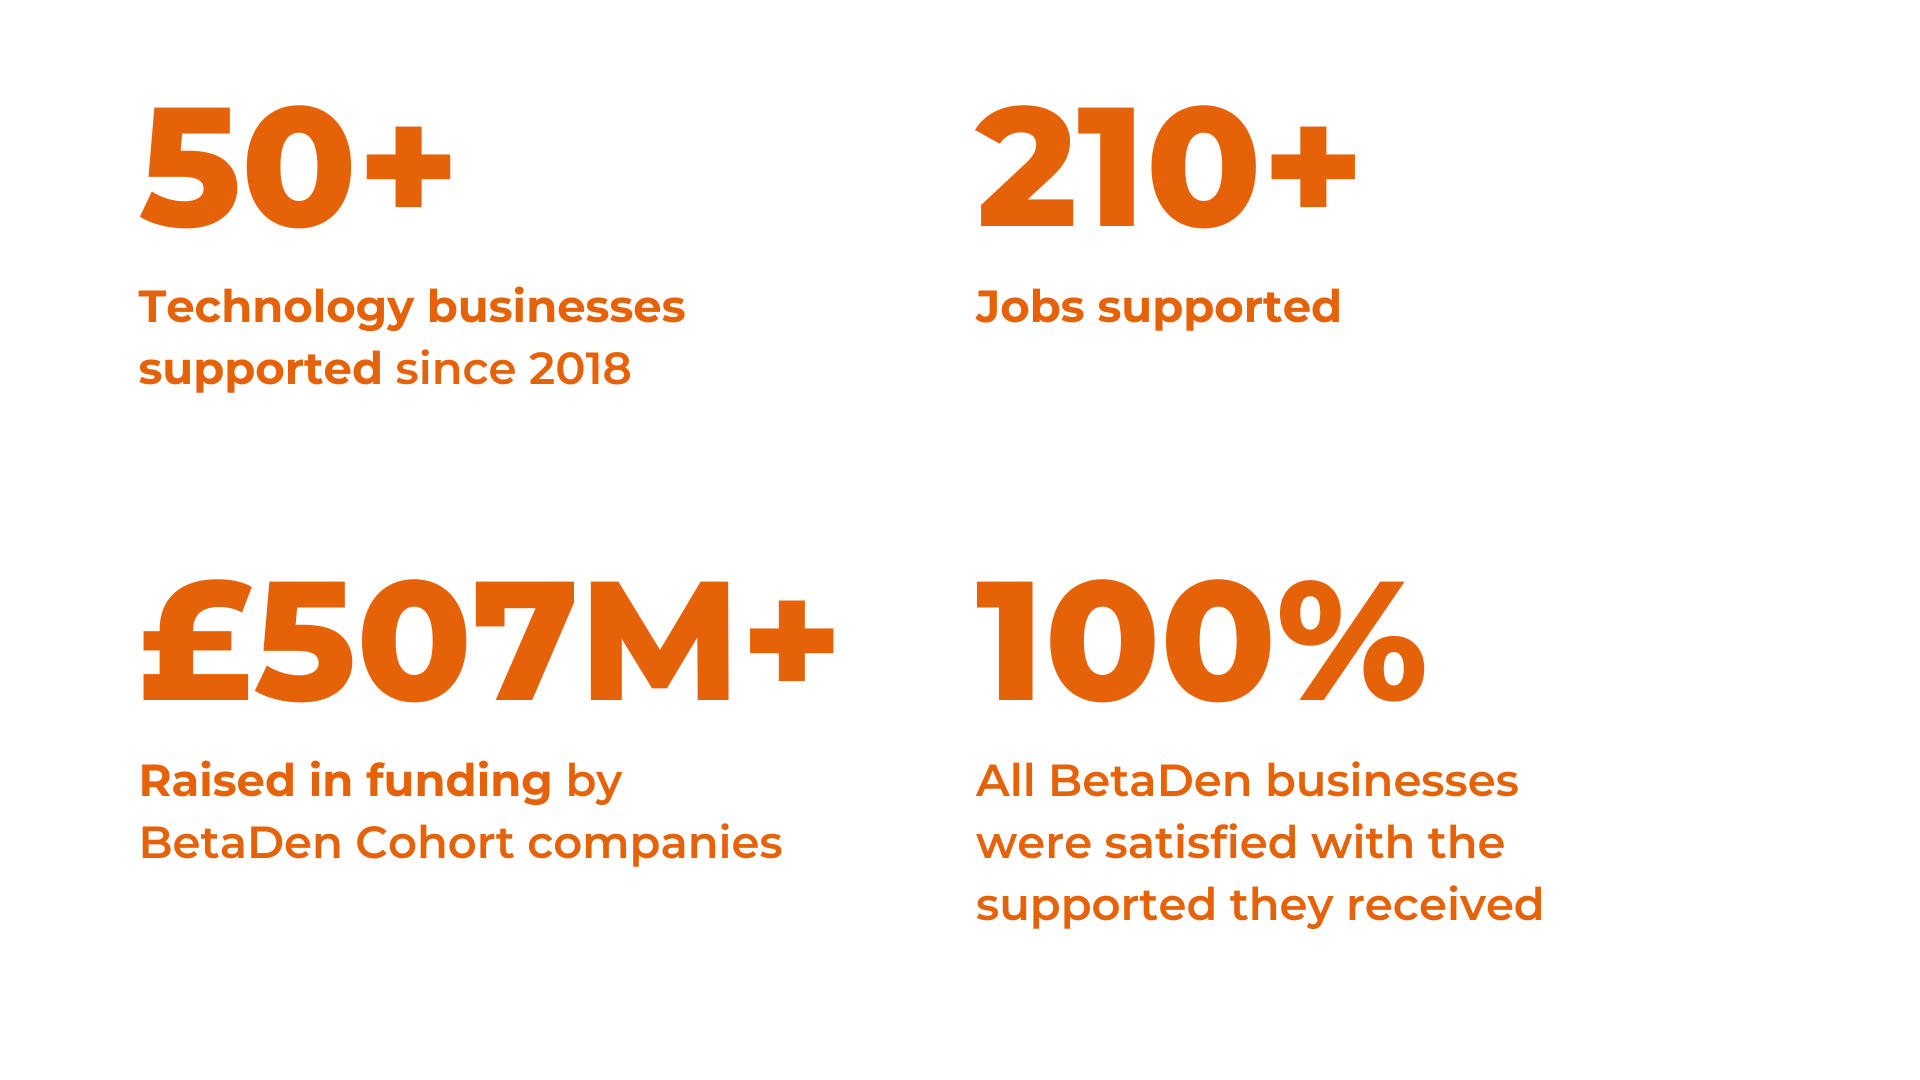 50+ technology businesses supported since 2018, 170+ jobs supported, £507+M raised in funding by BetaDen cohort companies, 100% All BetaDen Businesses were satisfied with the support they received